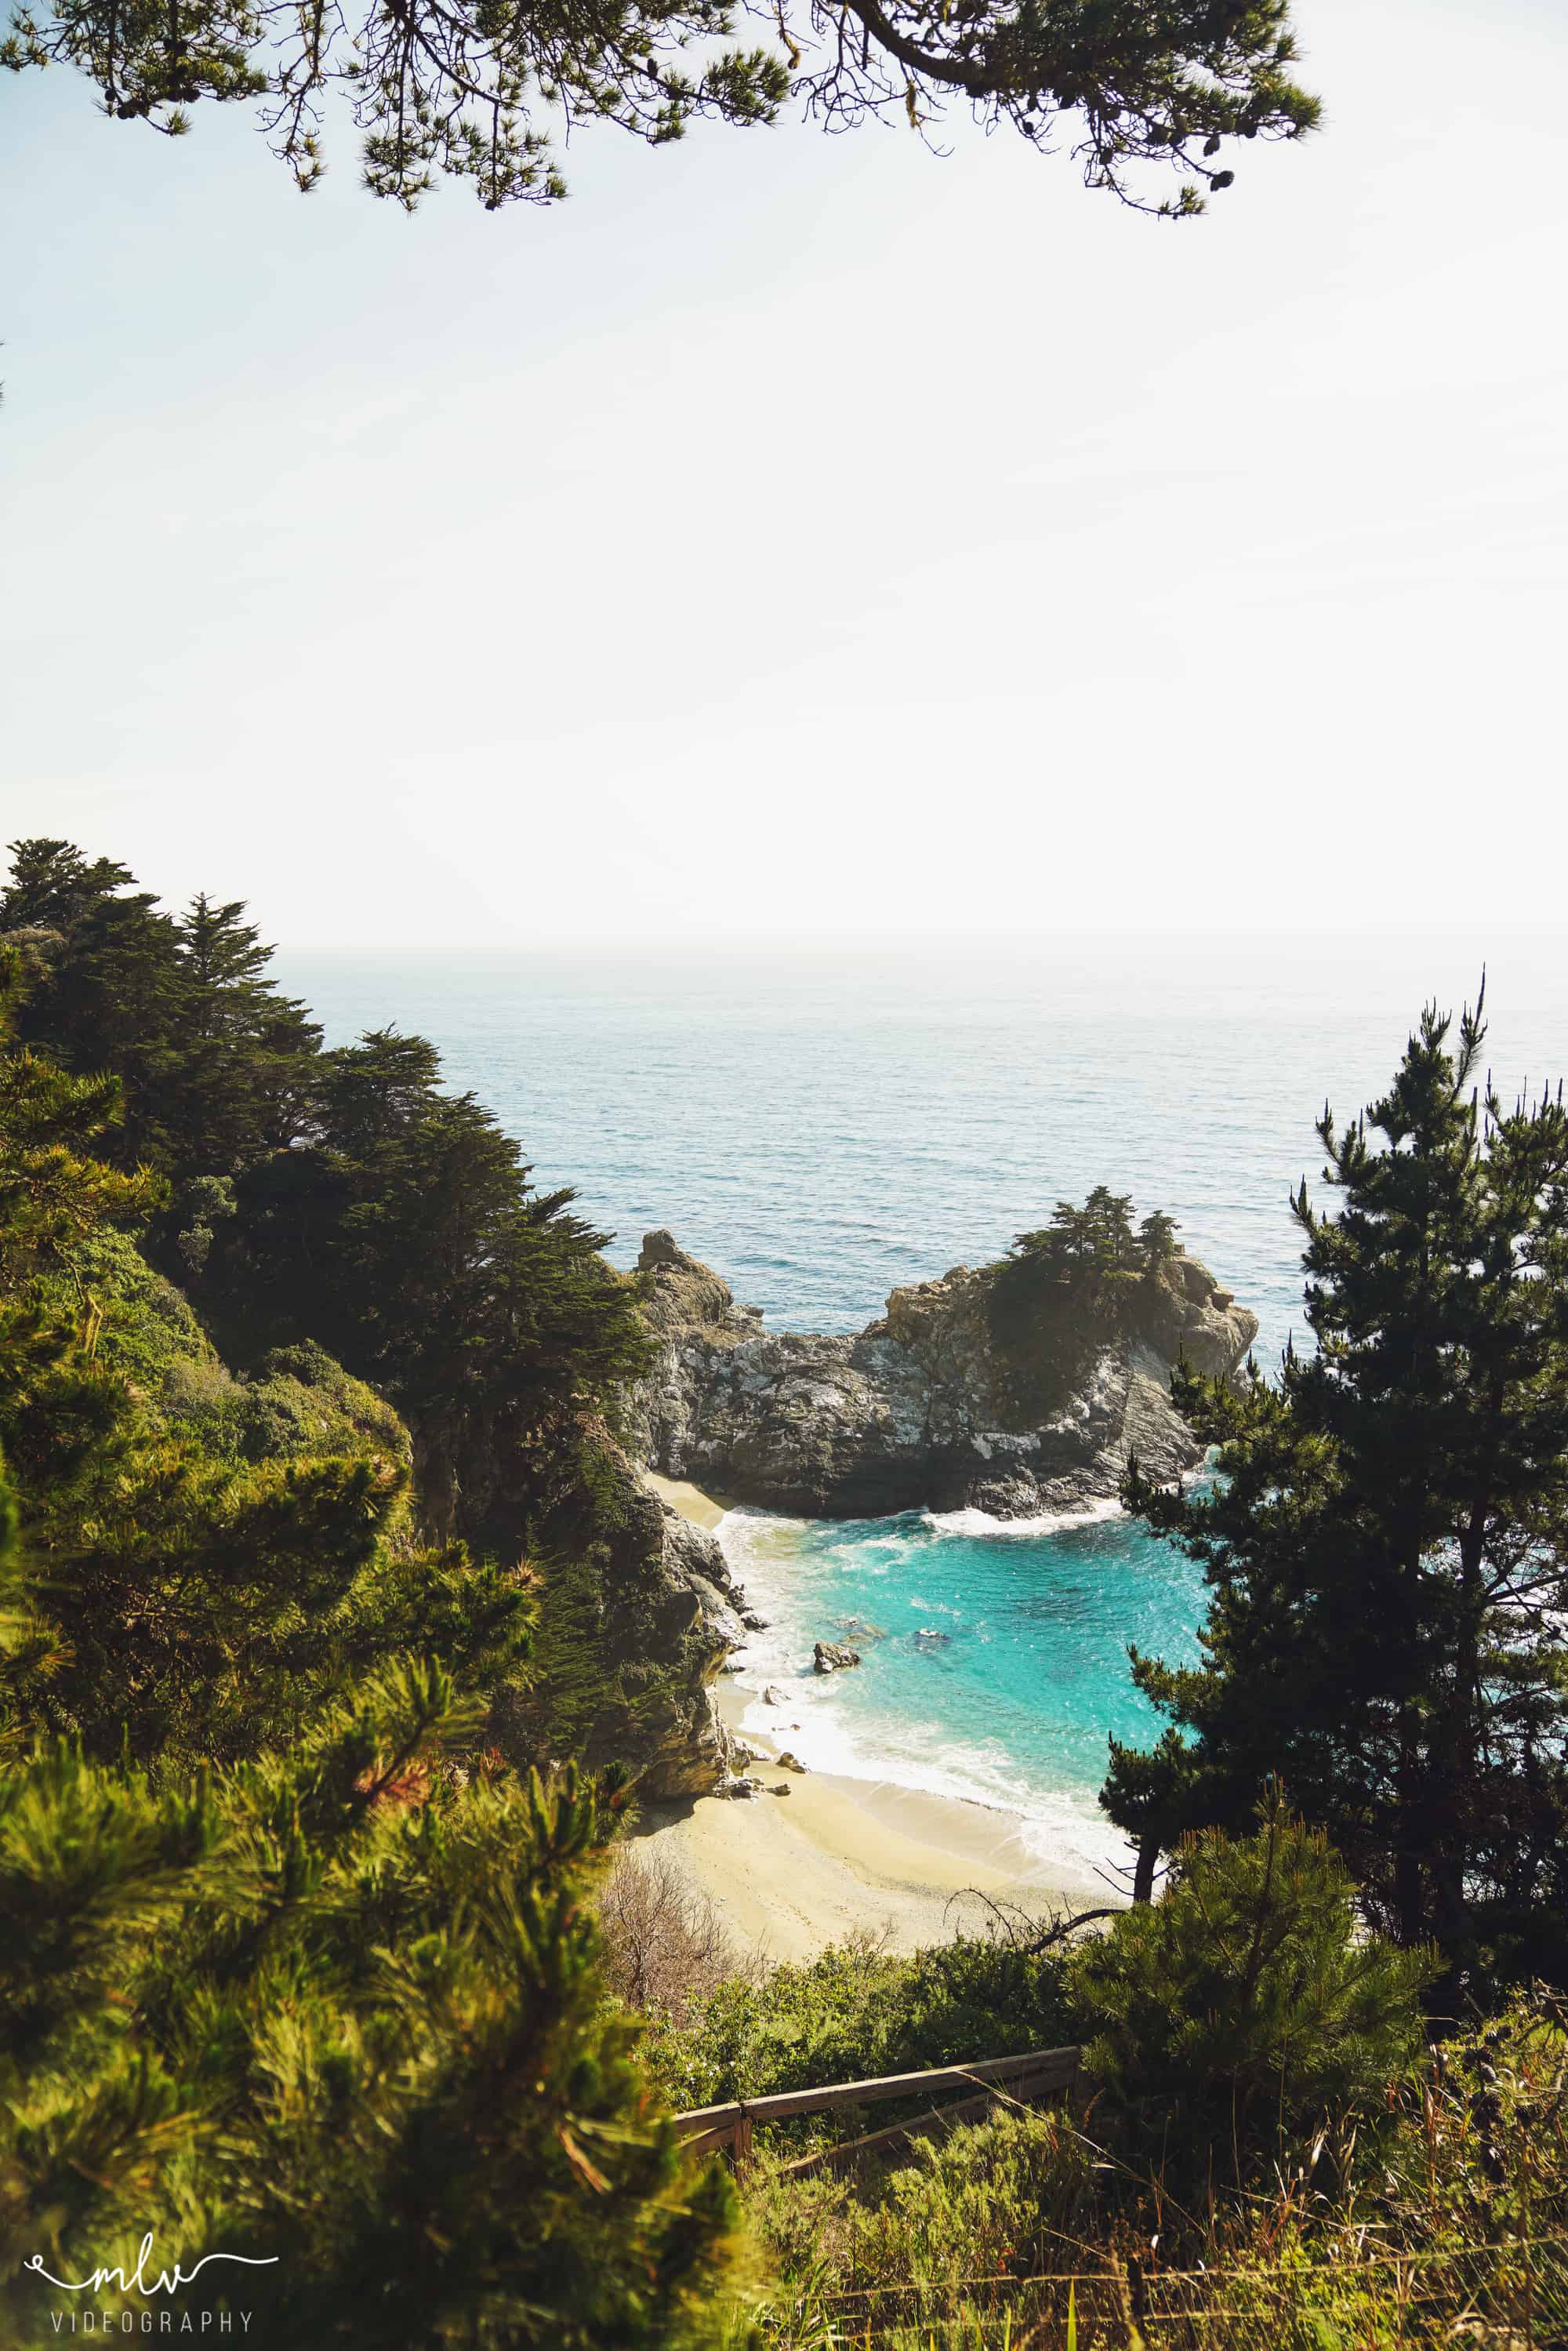 First Glance at McWay Falls